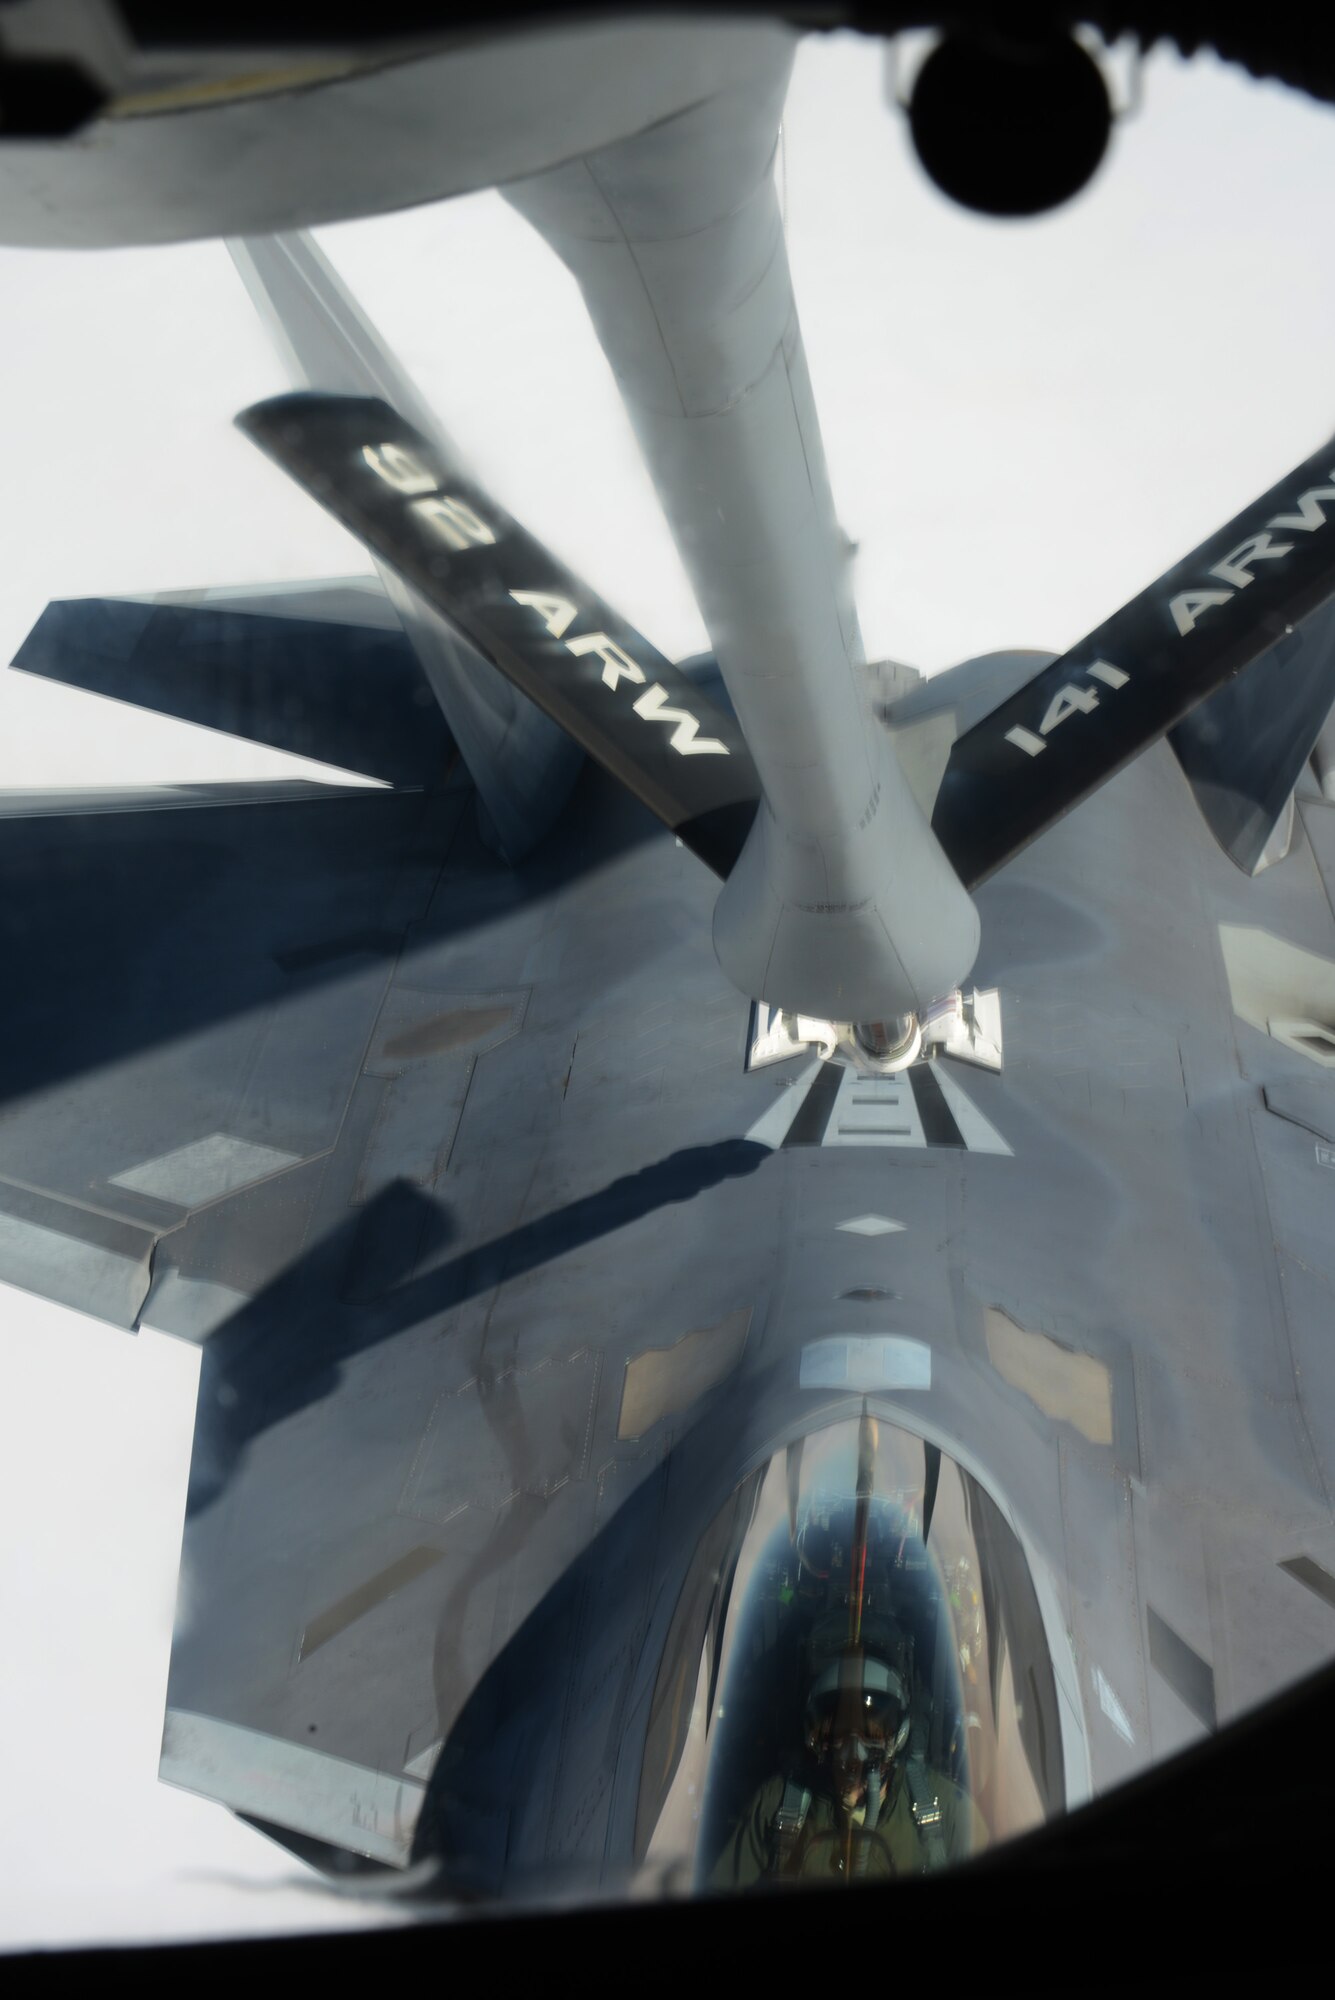 An F-22 Raptor from the 1st Fighter Wing, Joint Base Langley-Eustis, Va., is refueled from a KC-135 Stratotanker from the 93rd Air Refueling Squadron Fairchild Air Force Base, Wash., over the Nevada Test and Training Range during Red Flag 14-1 at Nellis AFB, Nev., Feb. 6, 2014. The introduction of low-visibility conditions presents aircrews with a number of challenges that test their ability to perform the mission at any time; day or night. (U.S. Air Force photo by Senior Airman Benjamin Sutton/Released) 